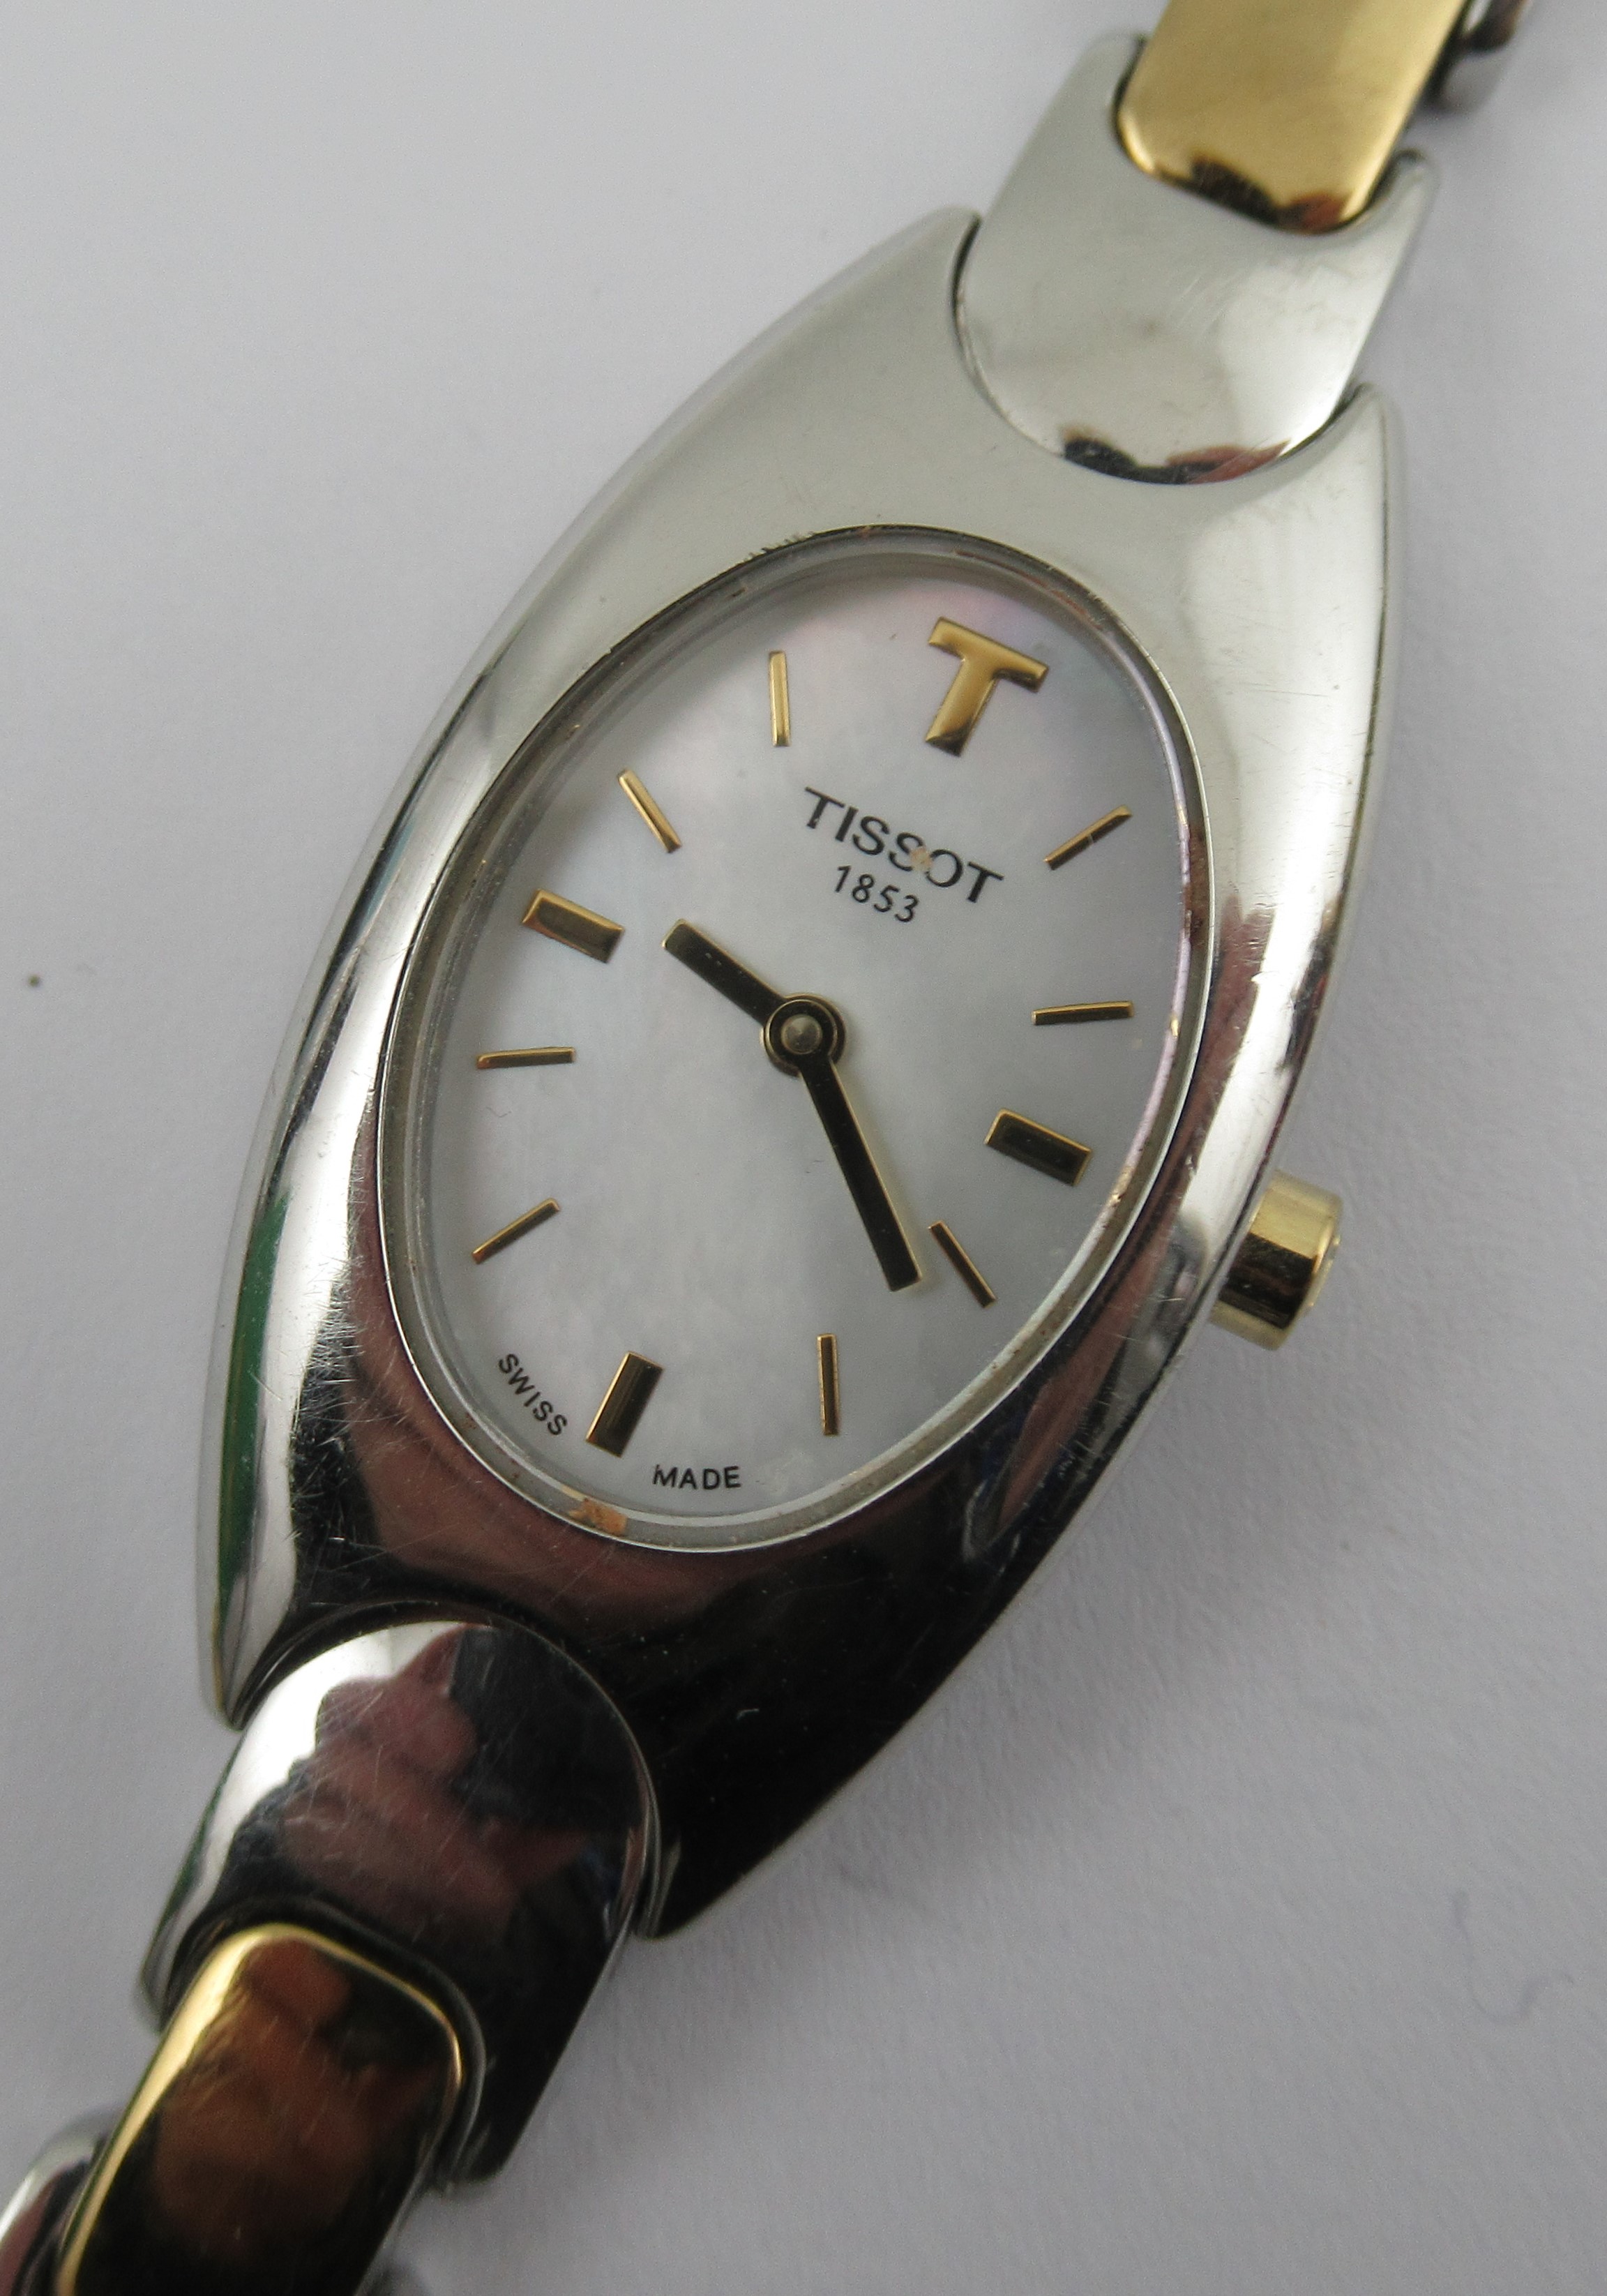 A Tissot stainless steel dress watch, with bimetal link strap, in case - Image 2 of 4